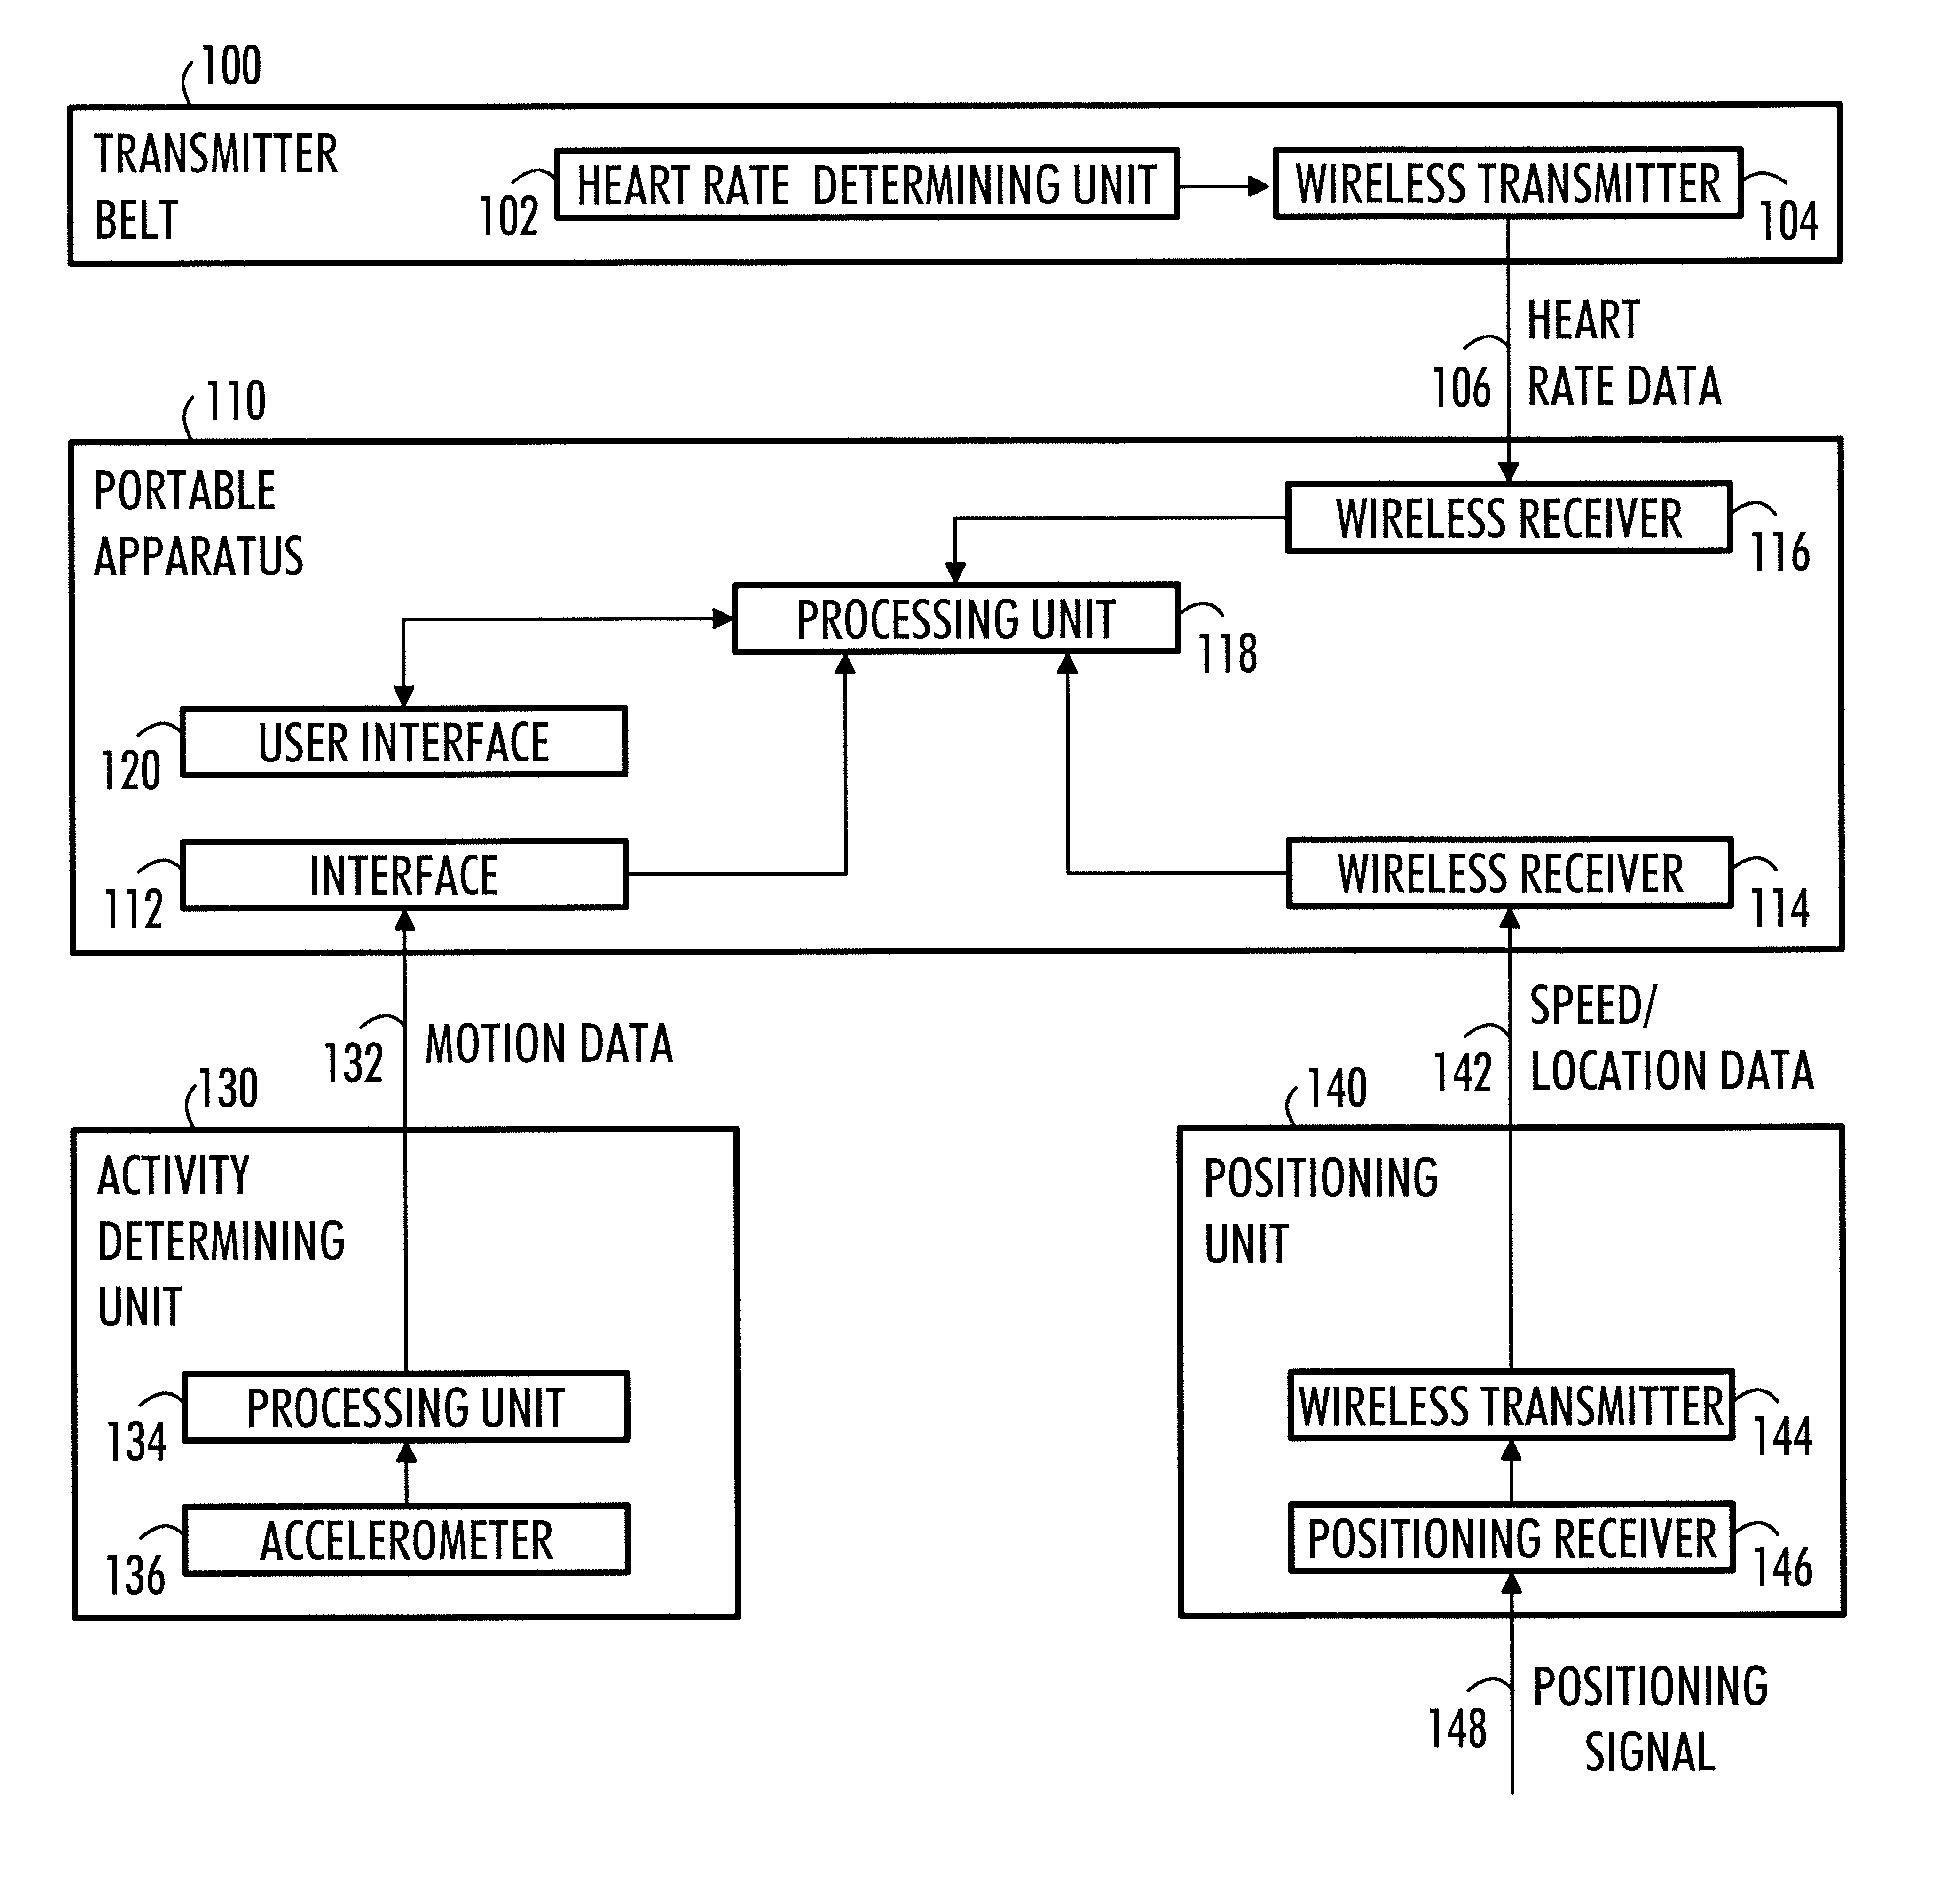 Portable apparatus for determining a user's physiological data with filtered speed data